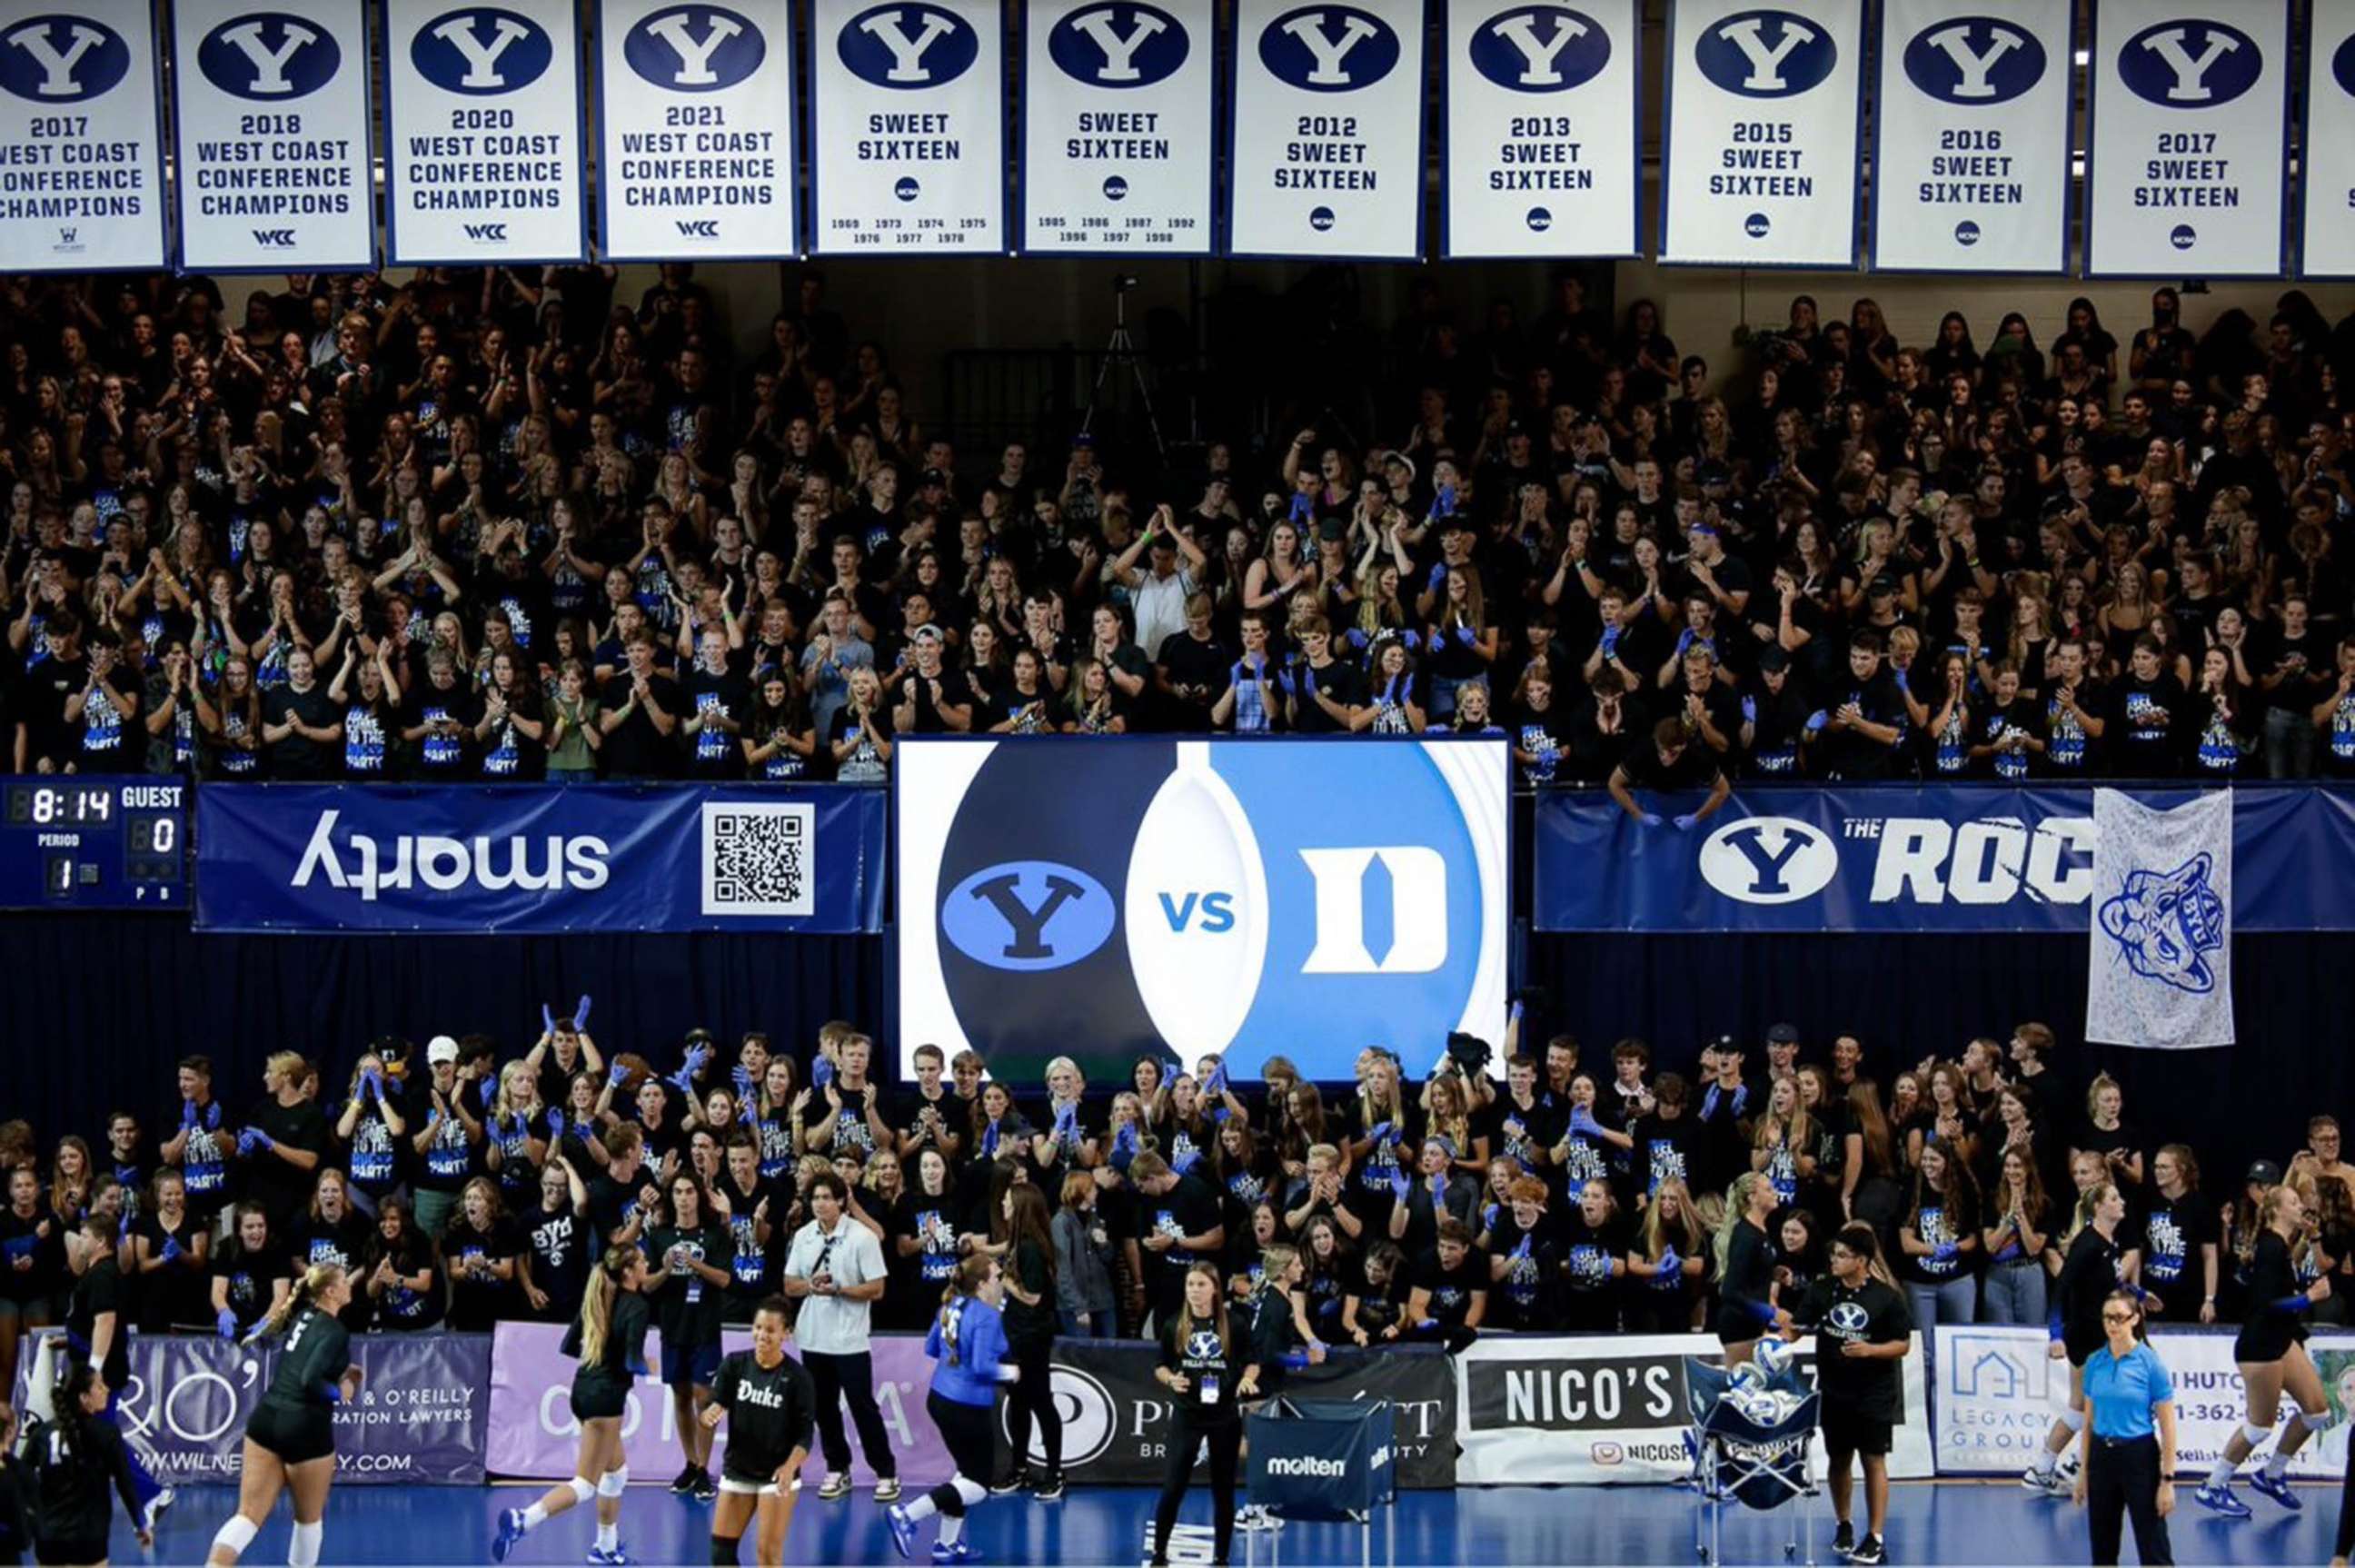 PHOTO: The Smith Fieldhouse at Brigham Young University has record setting attendance during a BYU vs Duke match in an image posted by BYU Women's Volleyball, Provo, Utah, Aug. 26, 2022.